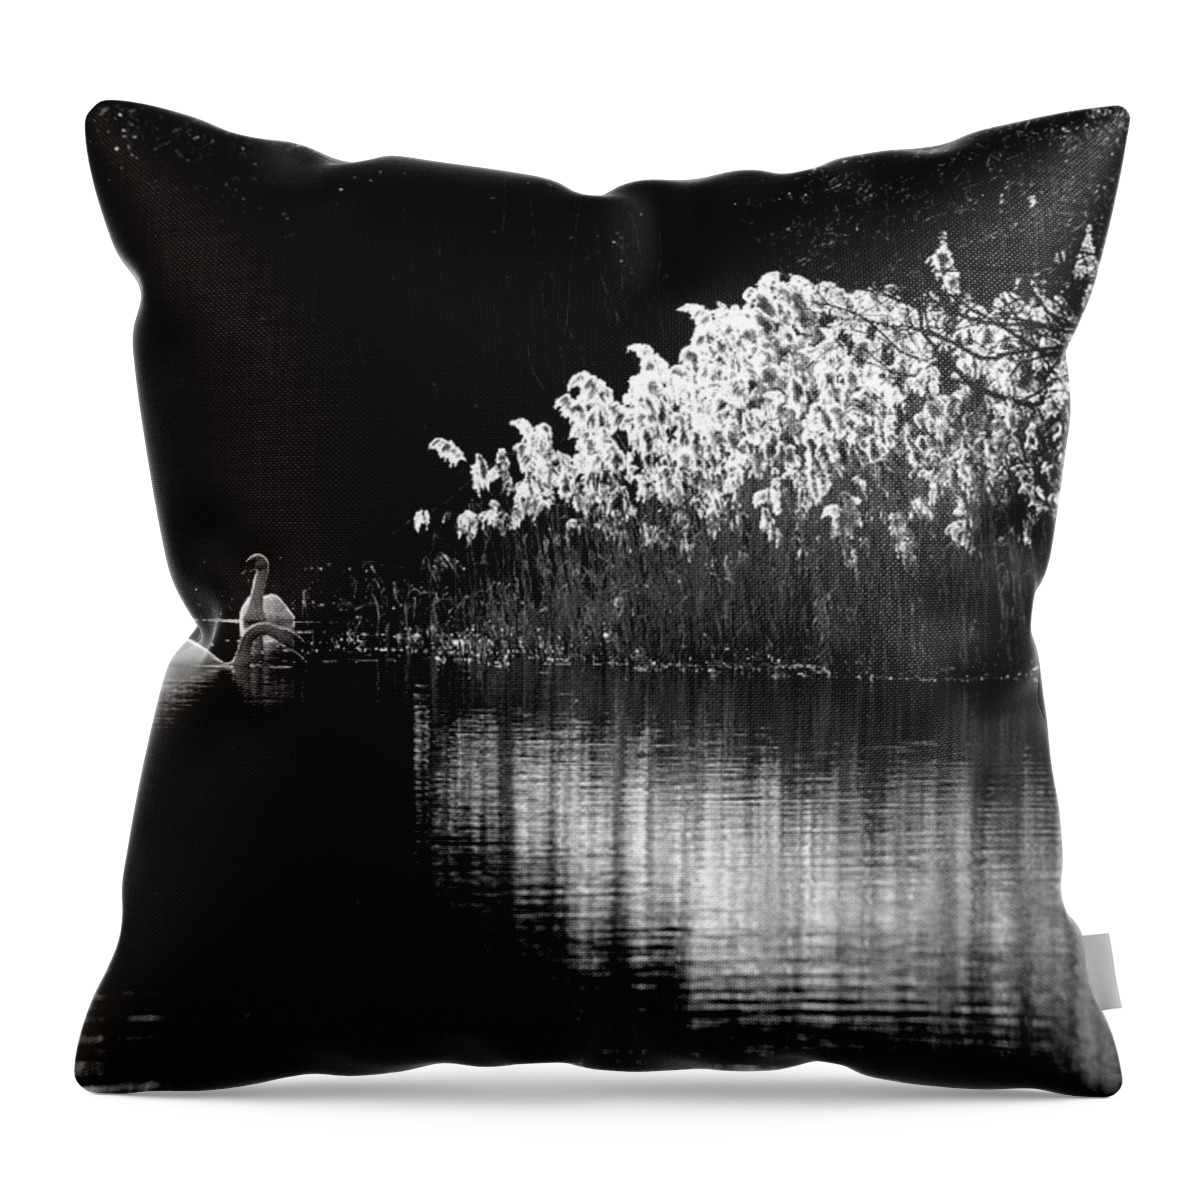 Swans Reeds Monochrome Throw Pillow featuring the photograph Swans and reeds #1 by Ian Sanders